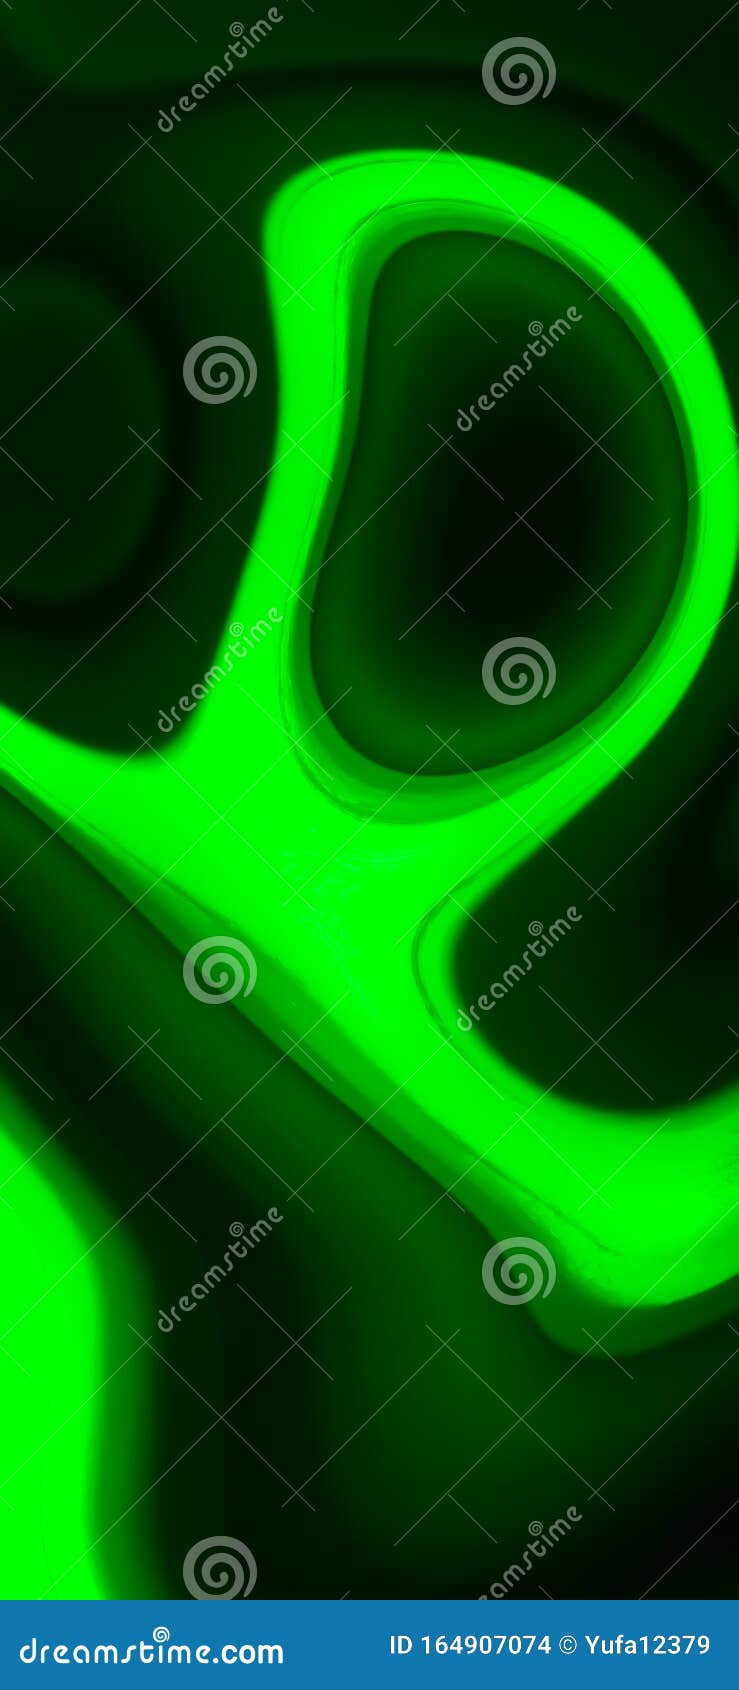 Abstract Vibrant Neon Background On Screen Device Display Blurred Color Gradient Wallpapers Futuristic Flyer Cover Mobile App Stock Illustration Illustration Of Collection Desktop 164907074